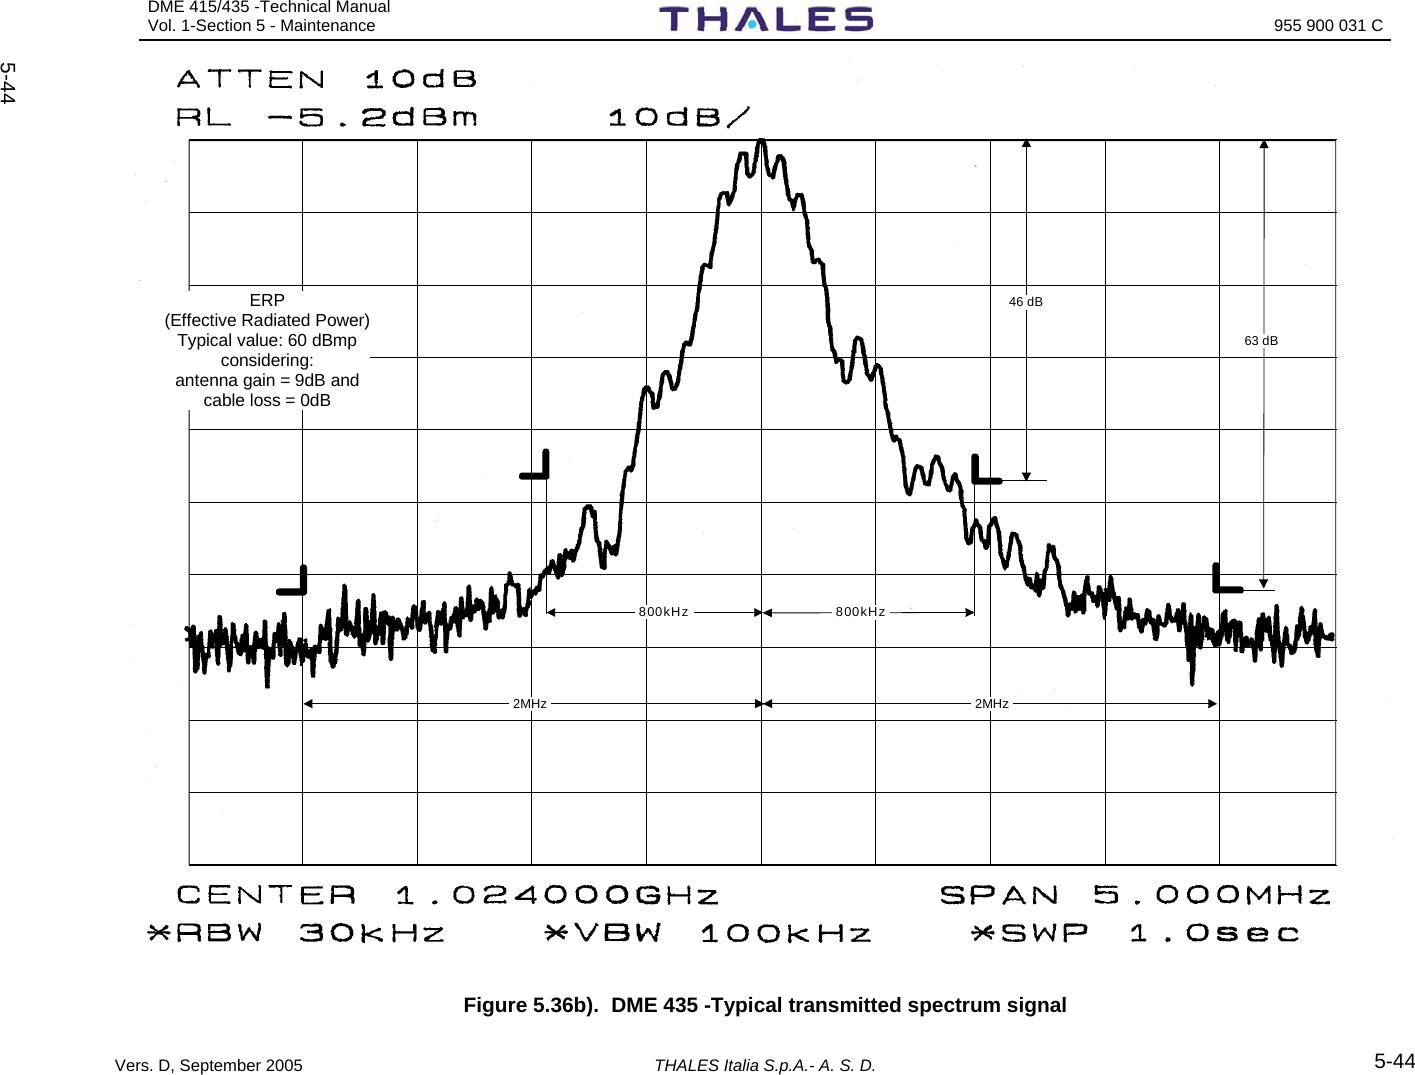 DME 415/435 -Technical Manual Vol. 1-Section 5 - Maintenance    955 900 031 C  Vers. D, September 2005    THALES Italia S.p.A.- A. S. D. 5-44 5-44 800kHz   800kHz  2MHz  2MHz  46 dB  63 dB ERP(Effective Radiated Power)Typical value: 60 dBmpconsidering: antenna gain = 9dB andcable loss = 0dB Figure 5.36b).  DME 435 -Typical transmitted spectrum signal 